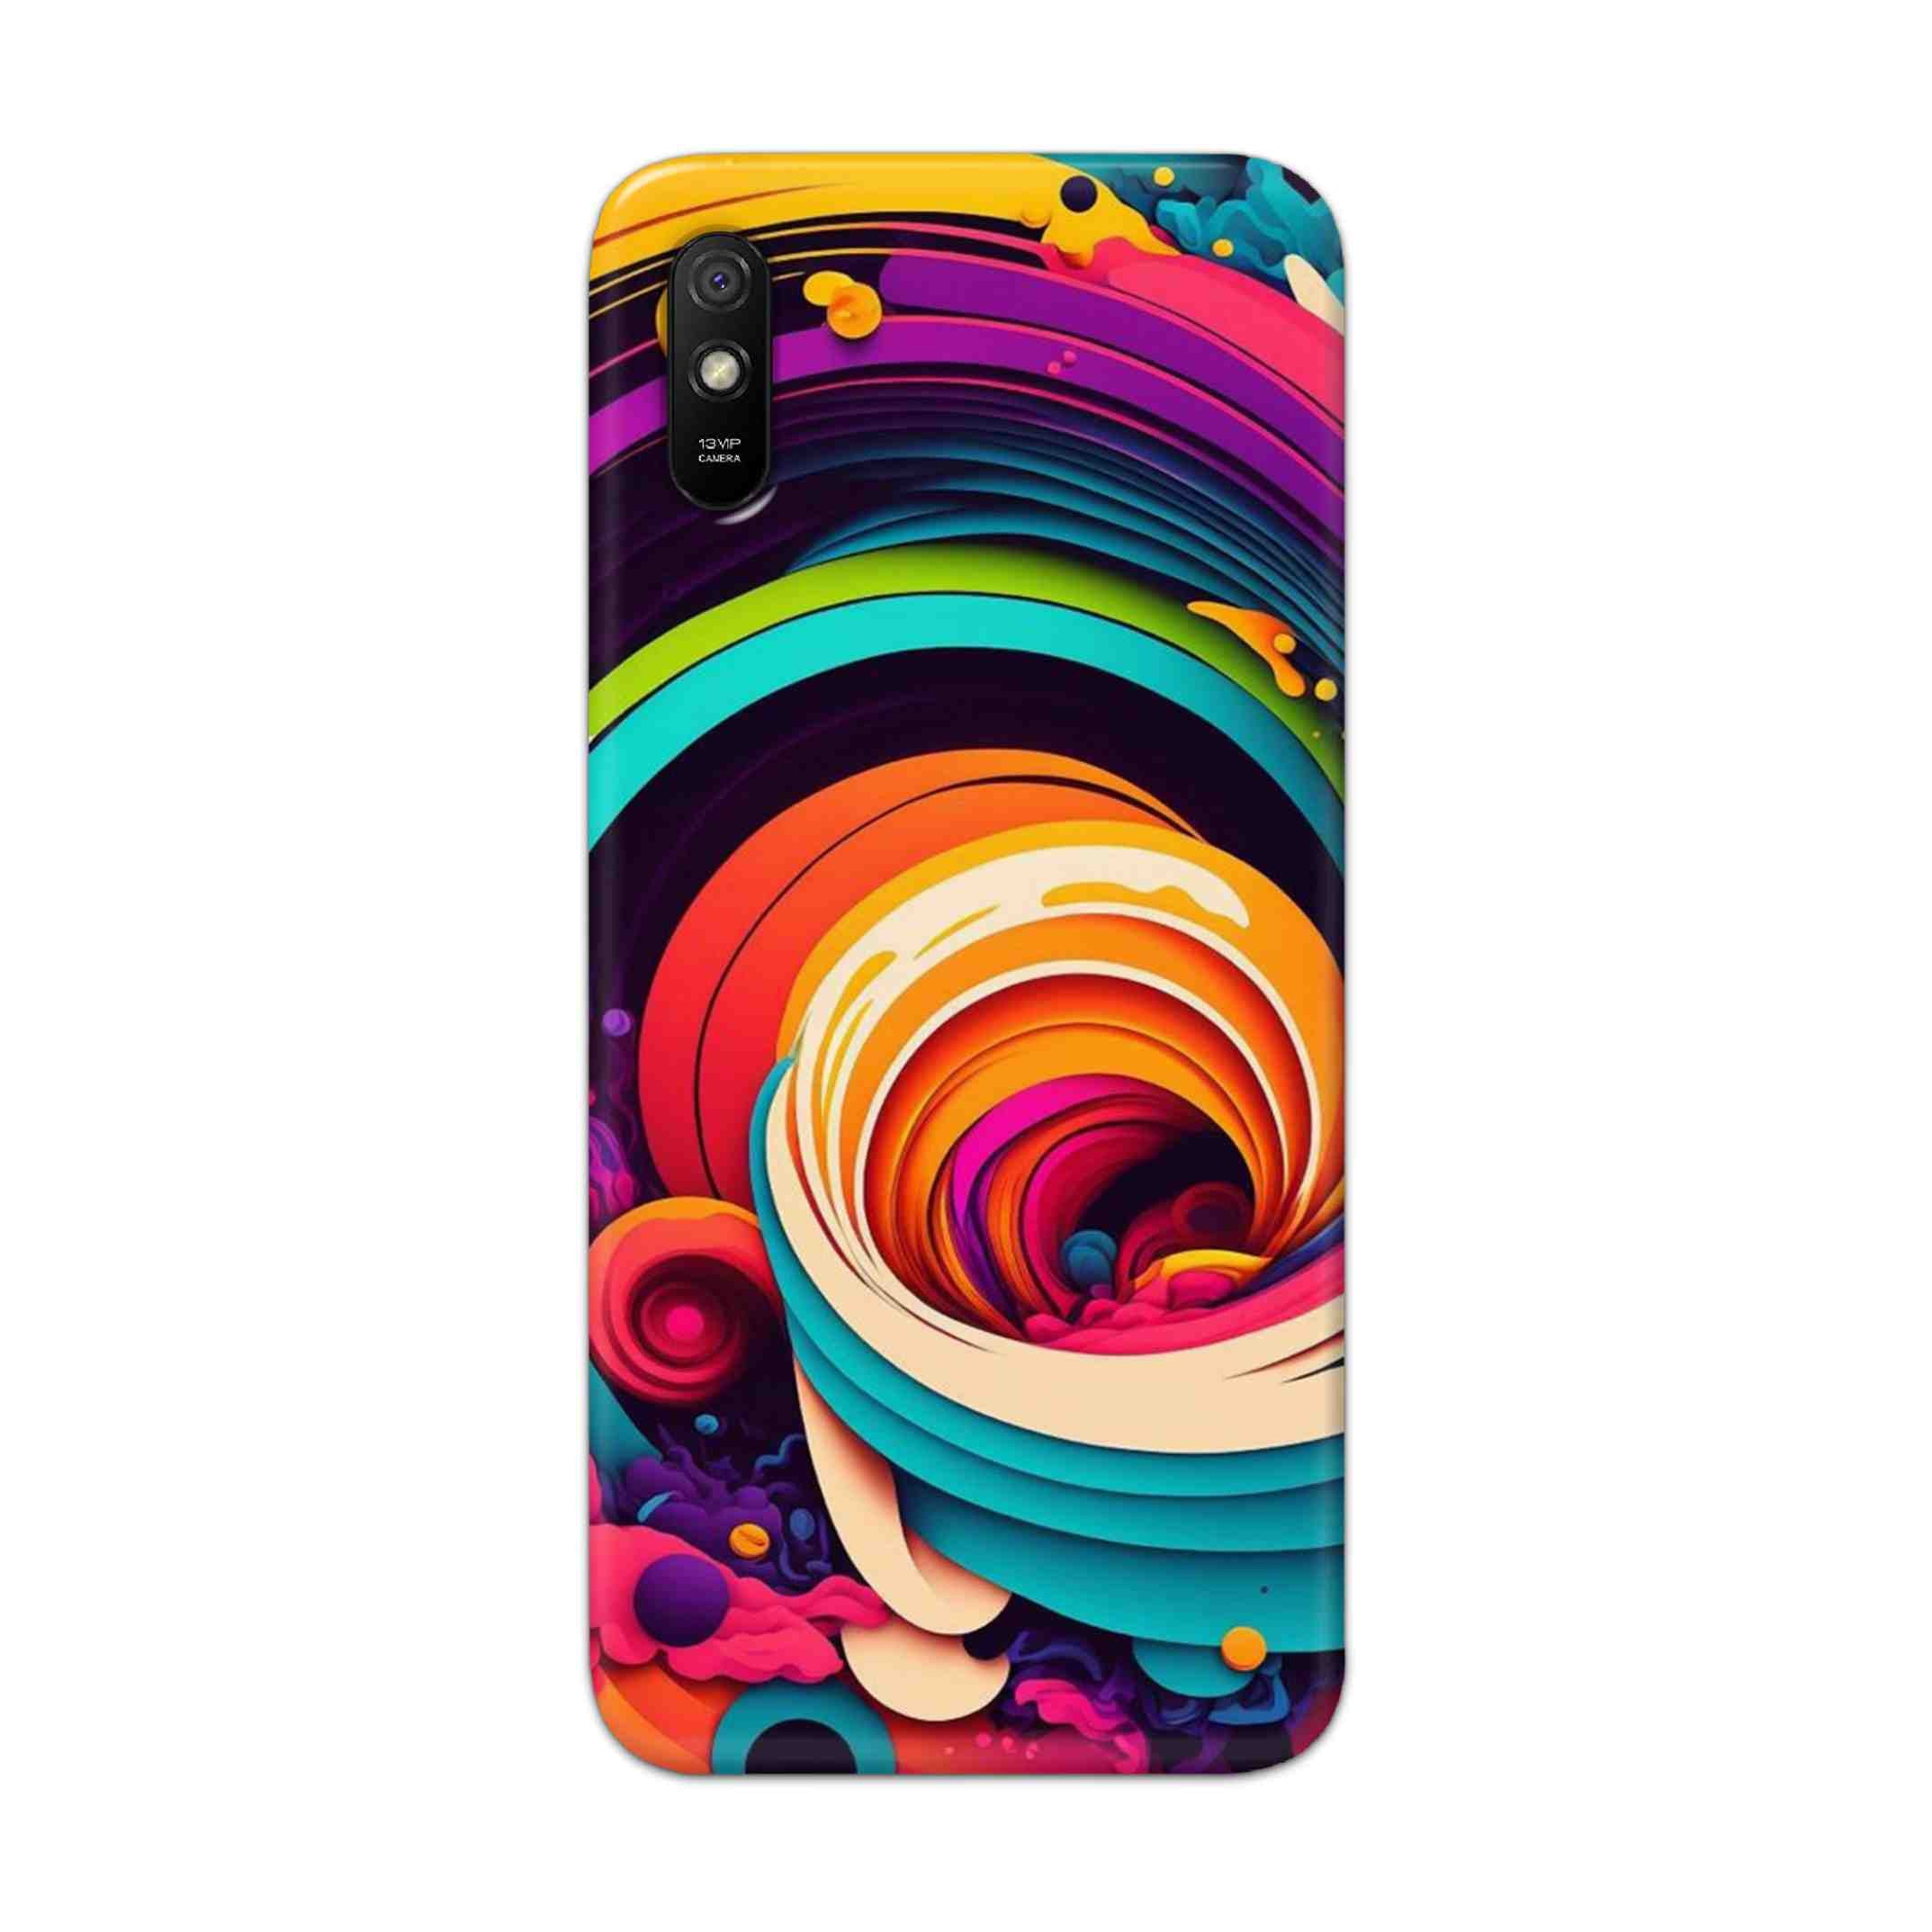 Buy Colour Circle Hard Back Mobile Phone Case Cover For Redmi 9A Online